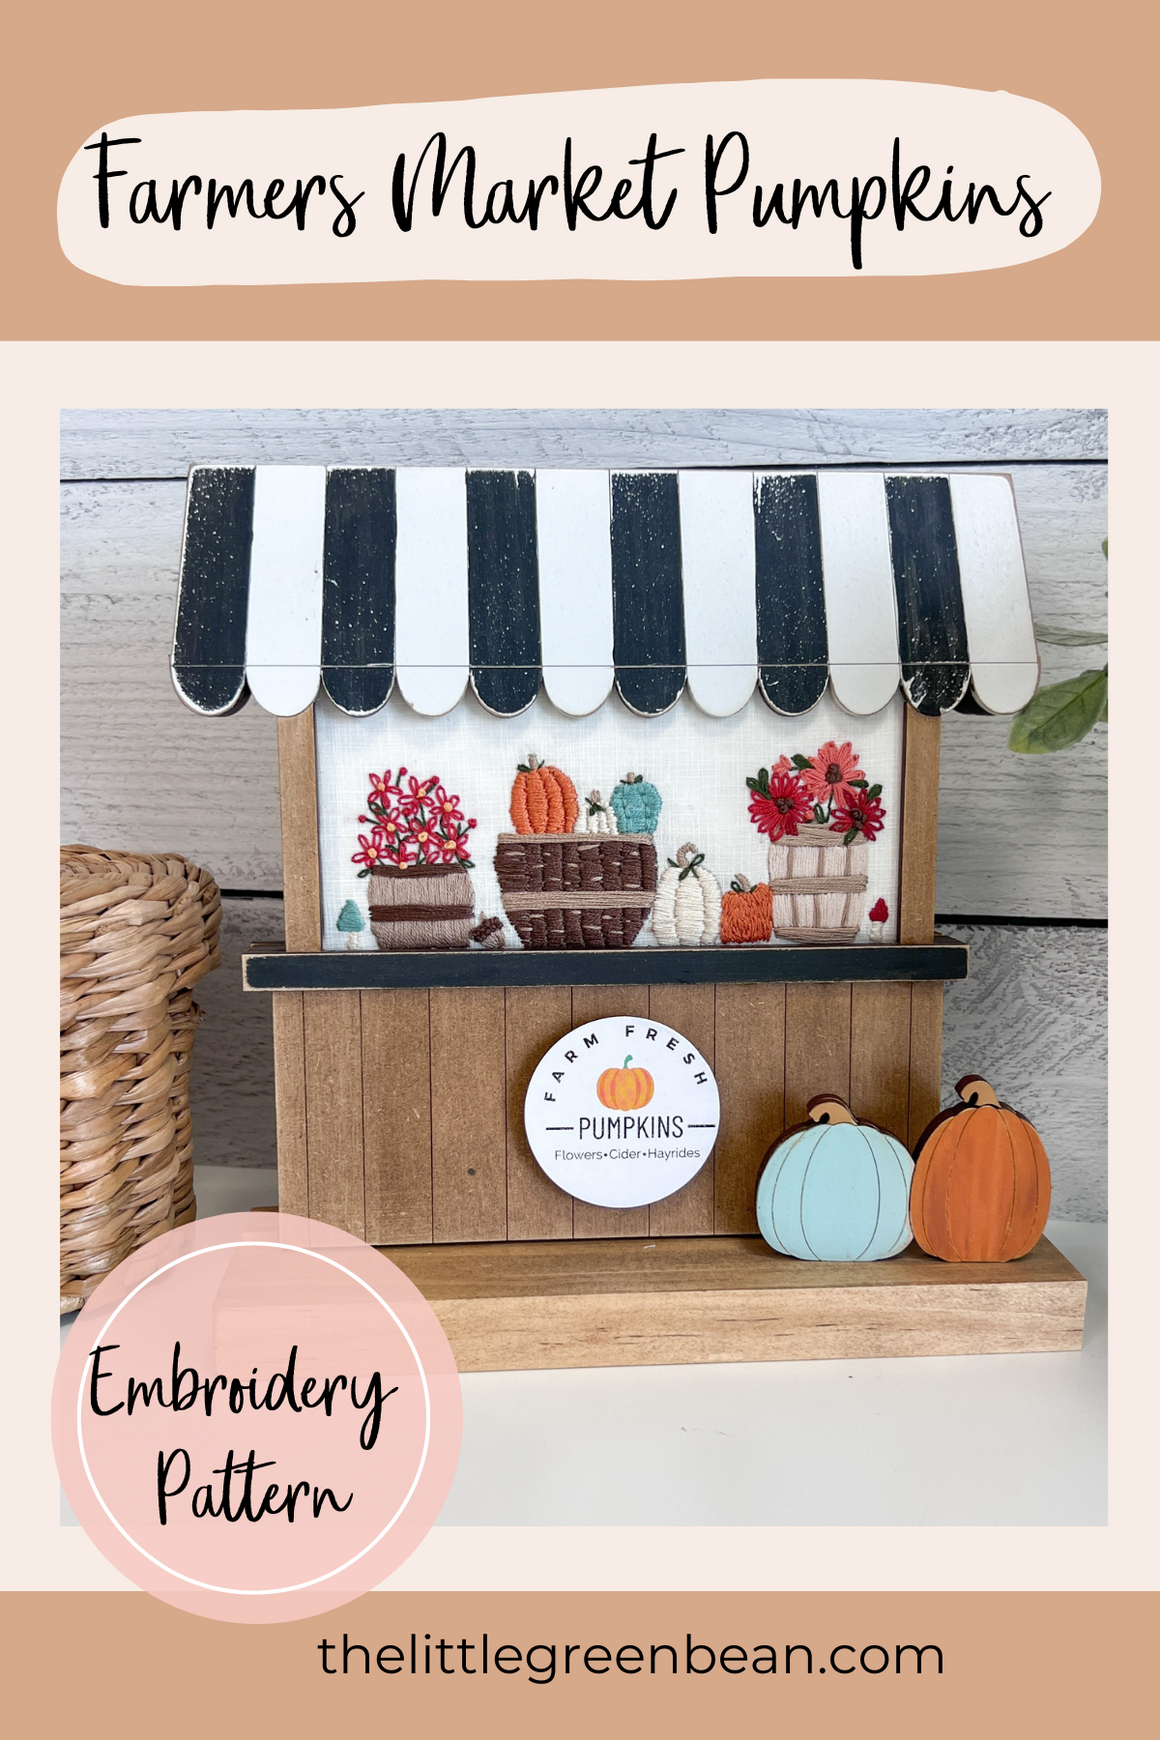 Farmers market Stand Pumpkins| Embroidery Pattern